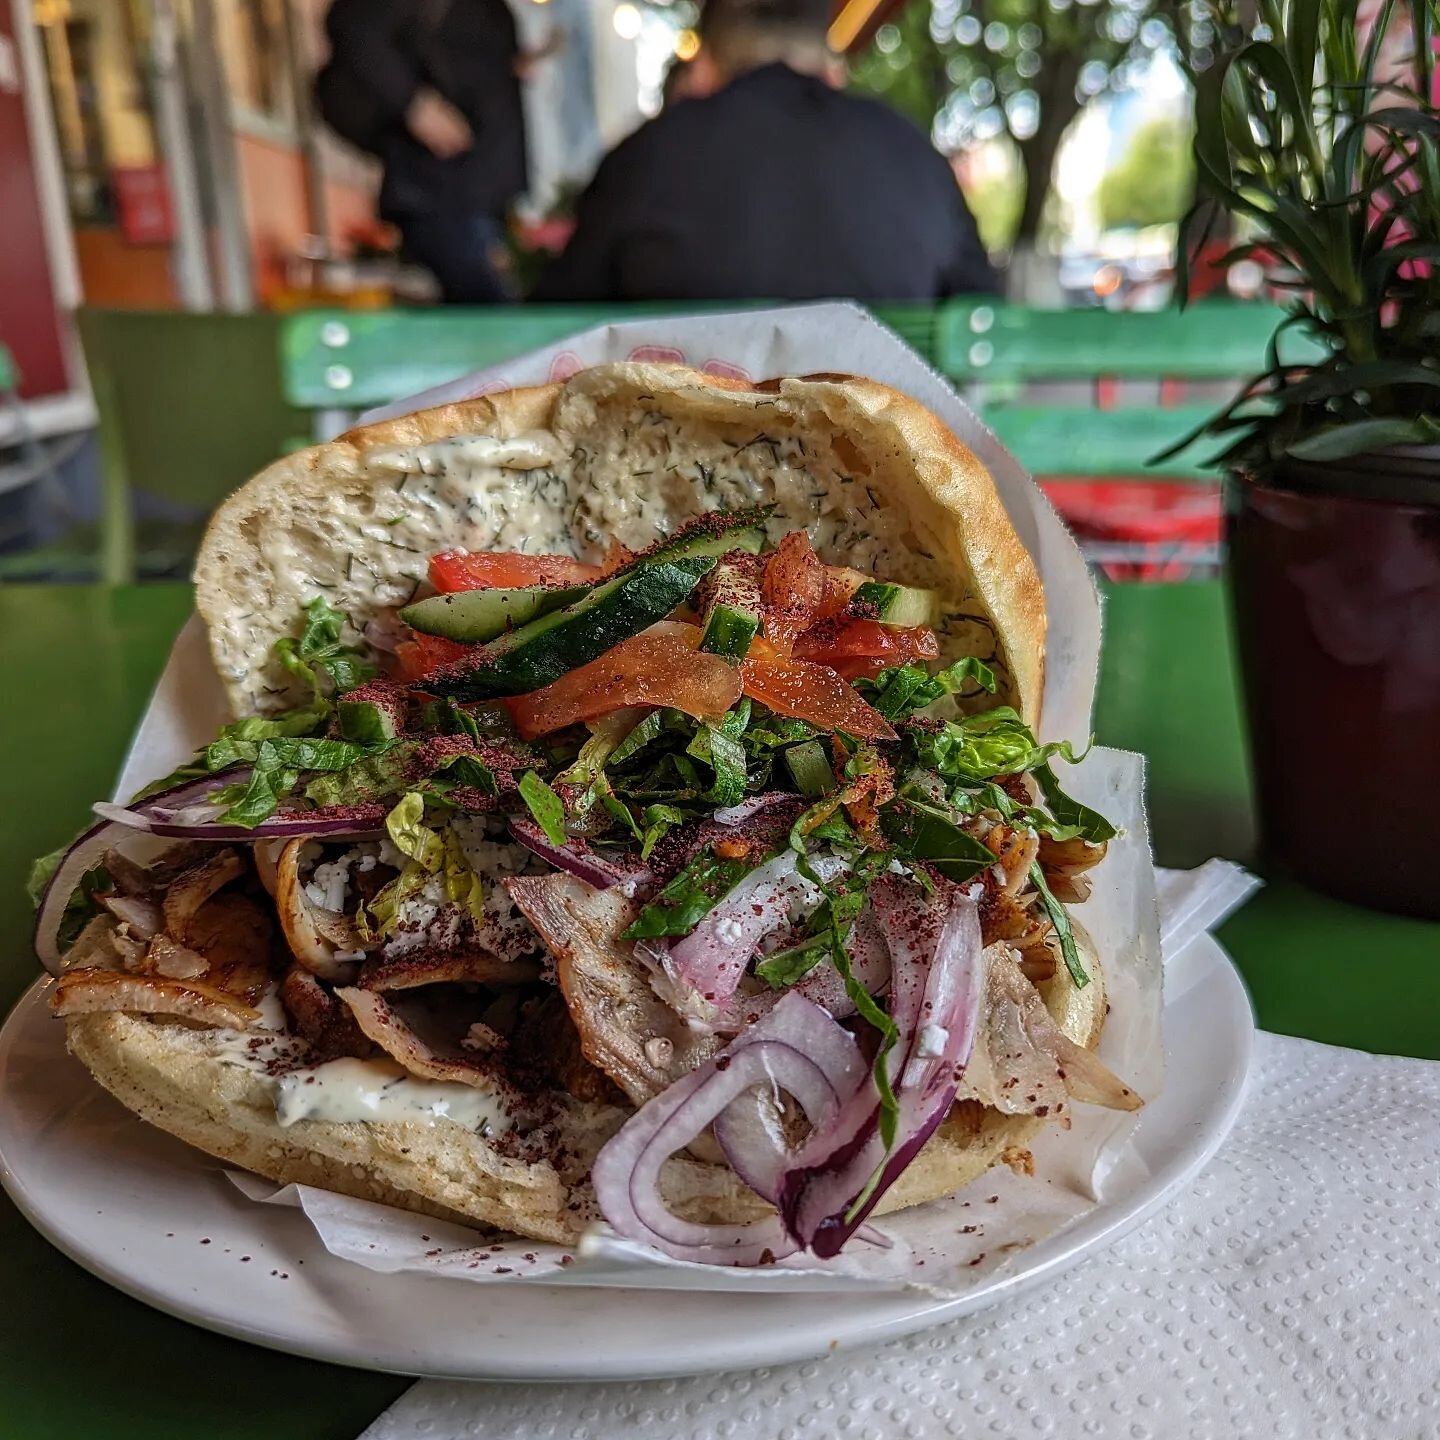 🗓️Thursday in Berlin means #d&ouml;nerstag 

🥙You can't leave Germany's capital without trying a legendary D&ouml;ner Kebab 

🇹🇷This classic of Turkish cuisine found popularity in the 1970s with waves of immigration to West Berlin. 

🏪Now firm l